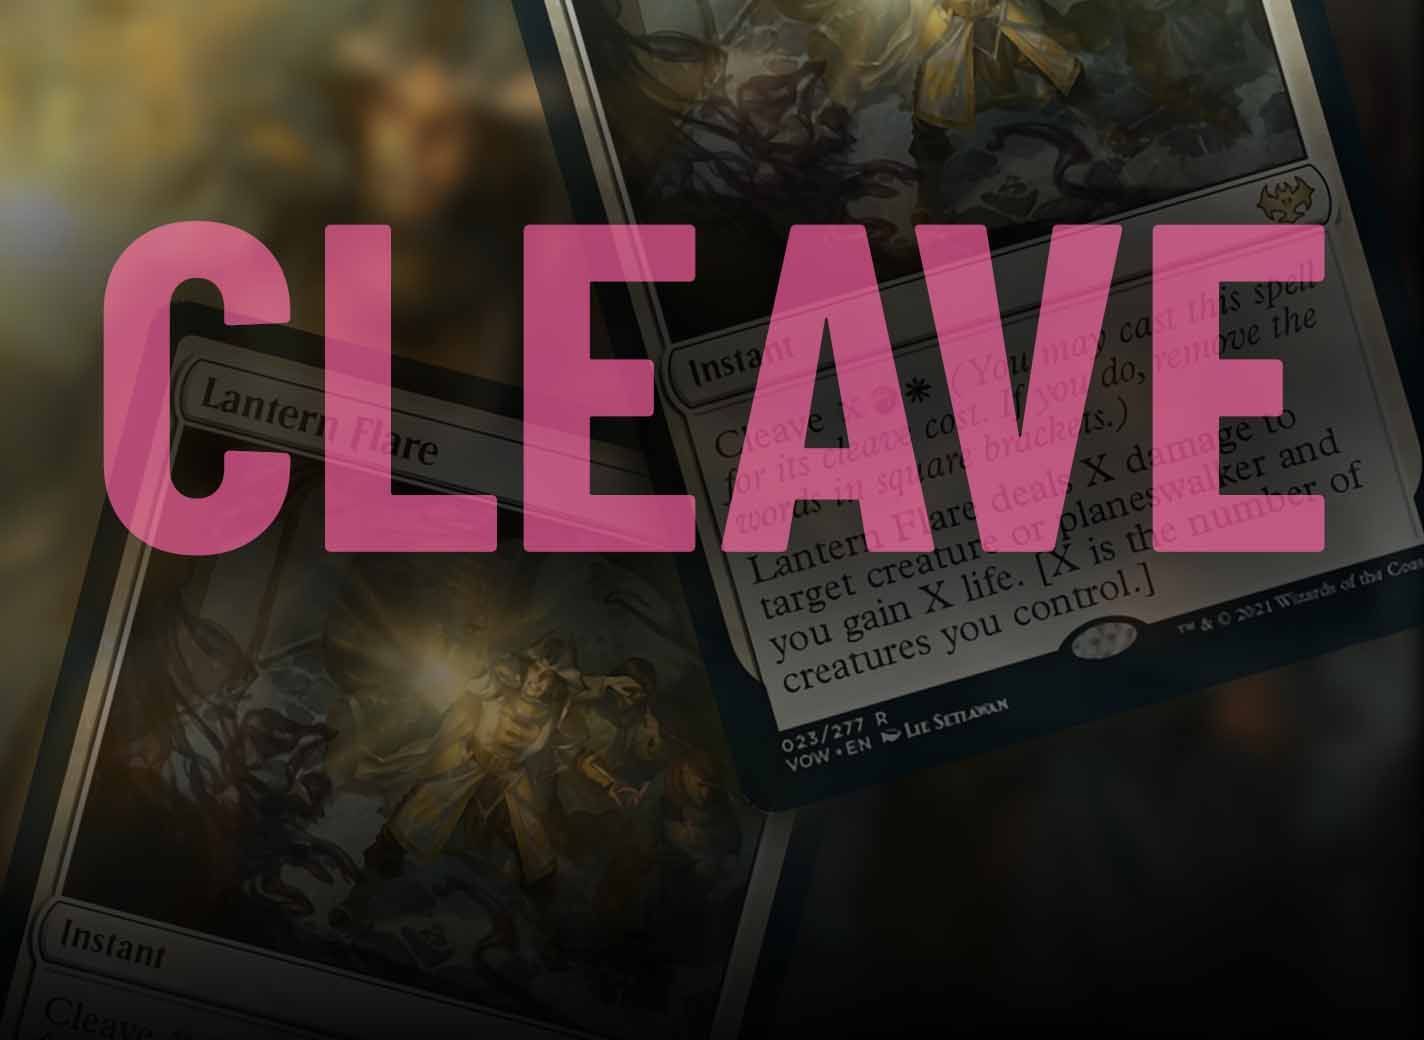 MTG Keywords Explained: What is Cleave?